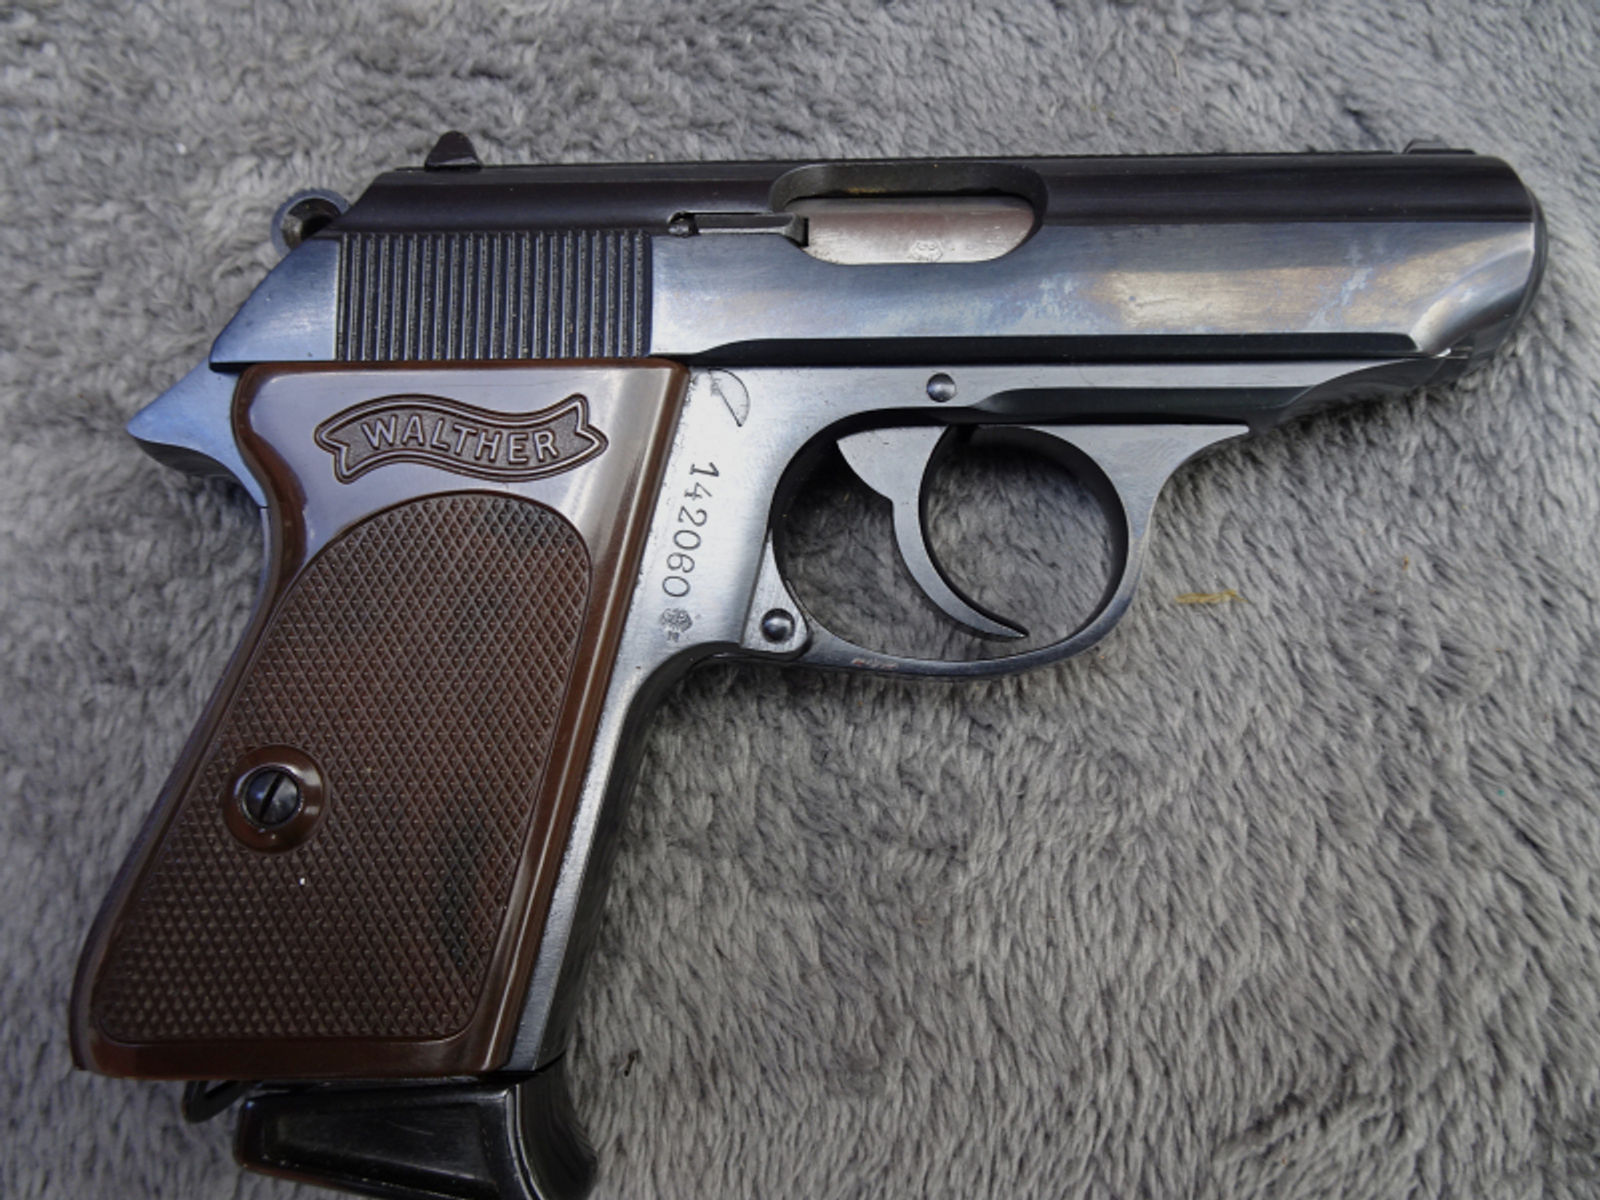 Pistole Walther PPK Kaliber 7,65mm